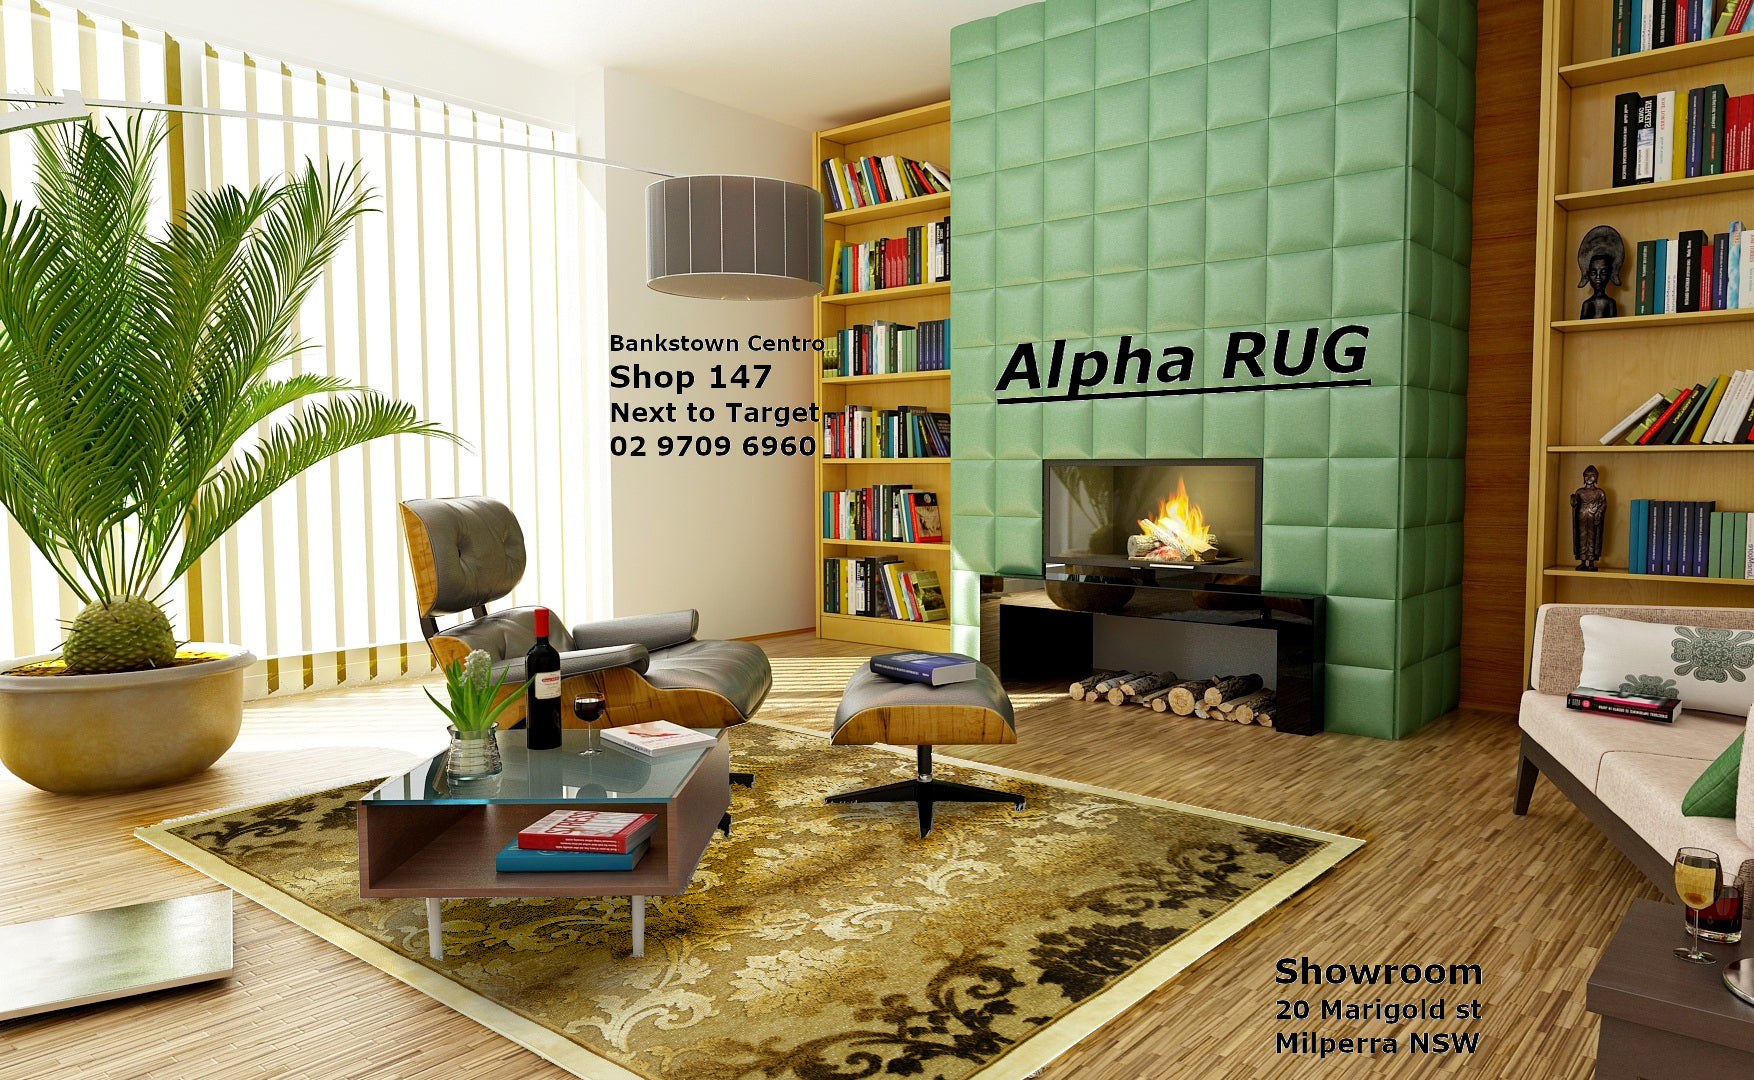 Designs I like to see more on Alpha rugs? (kind of design, colours, materials, sizes, etc)